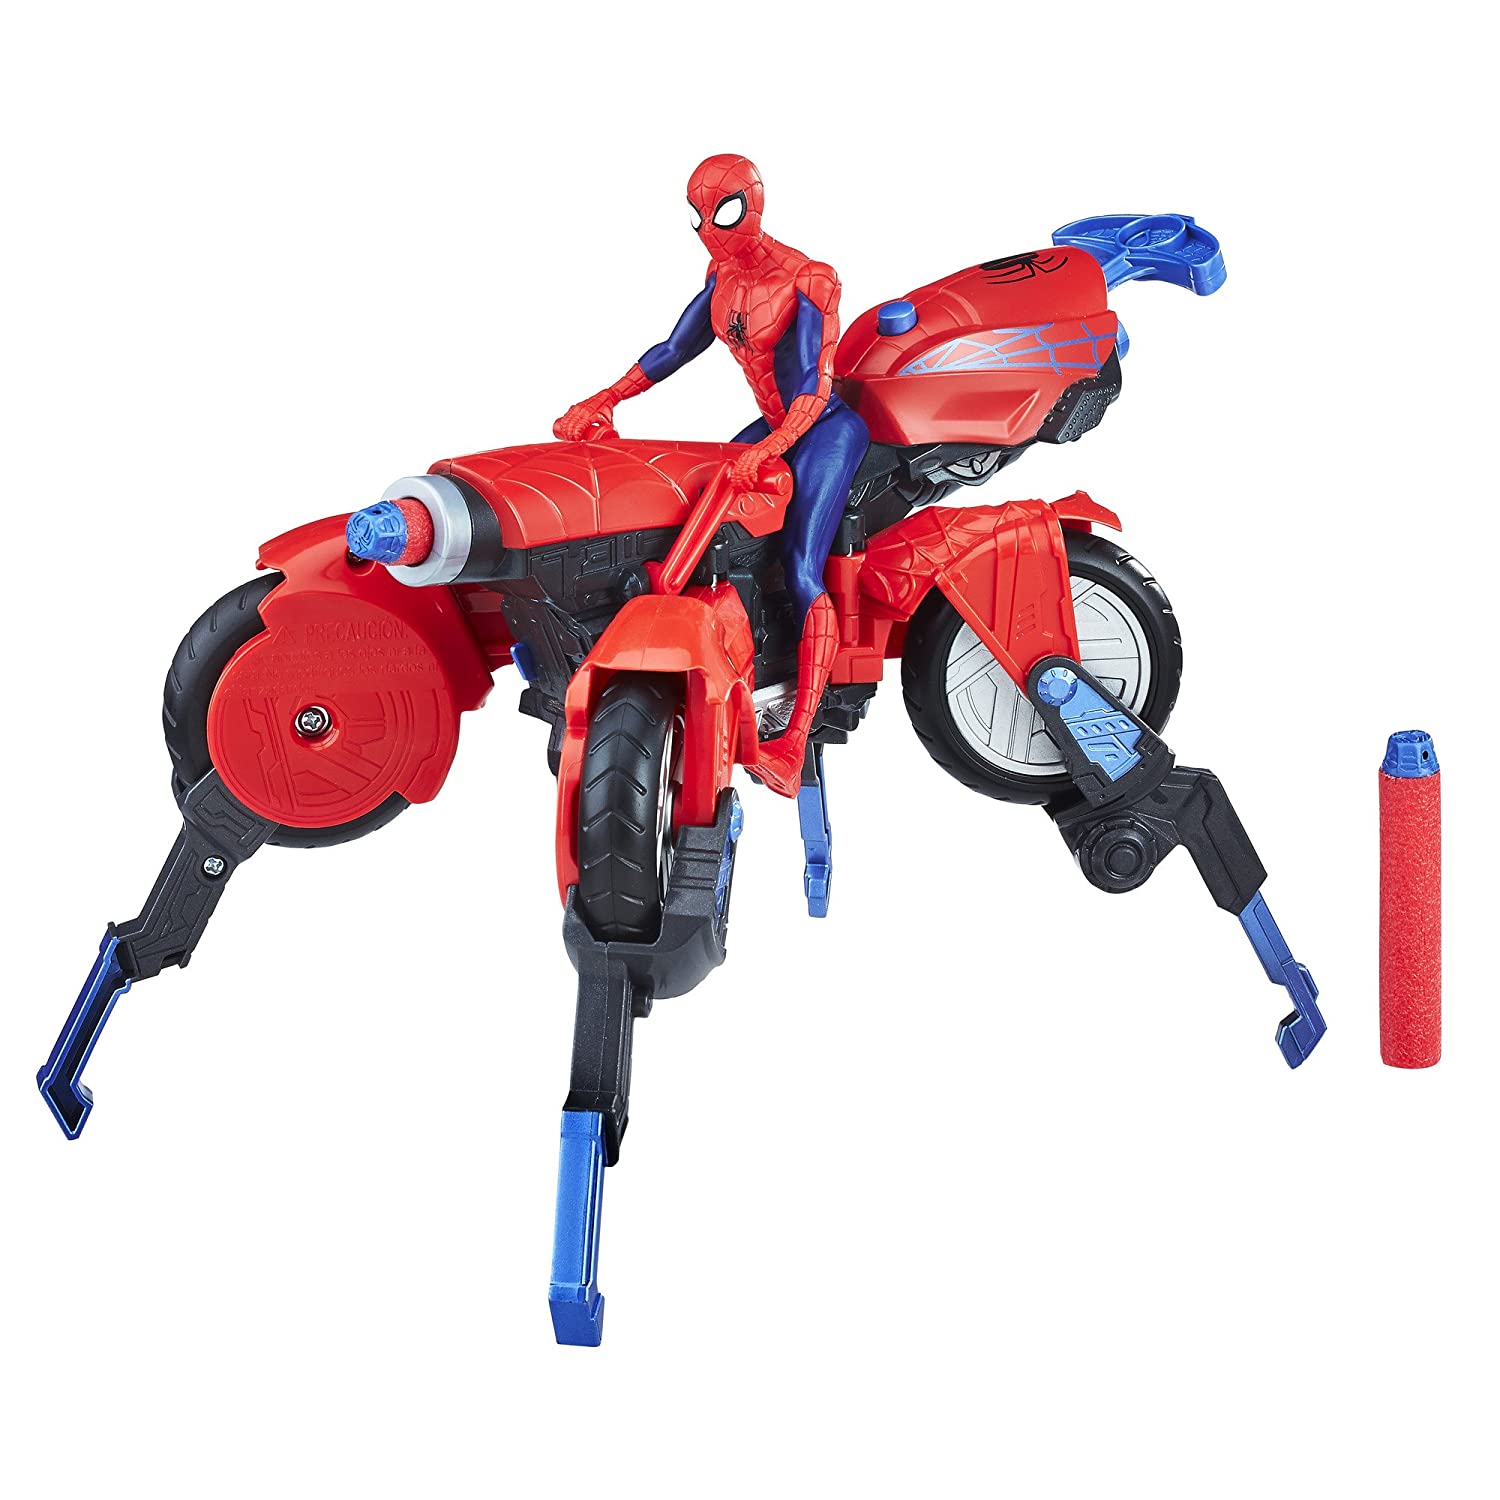 Marvel Spider-Man 3-in-1 Spider Cycle with Spider-Man Figure